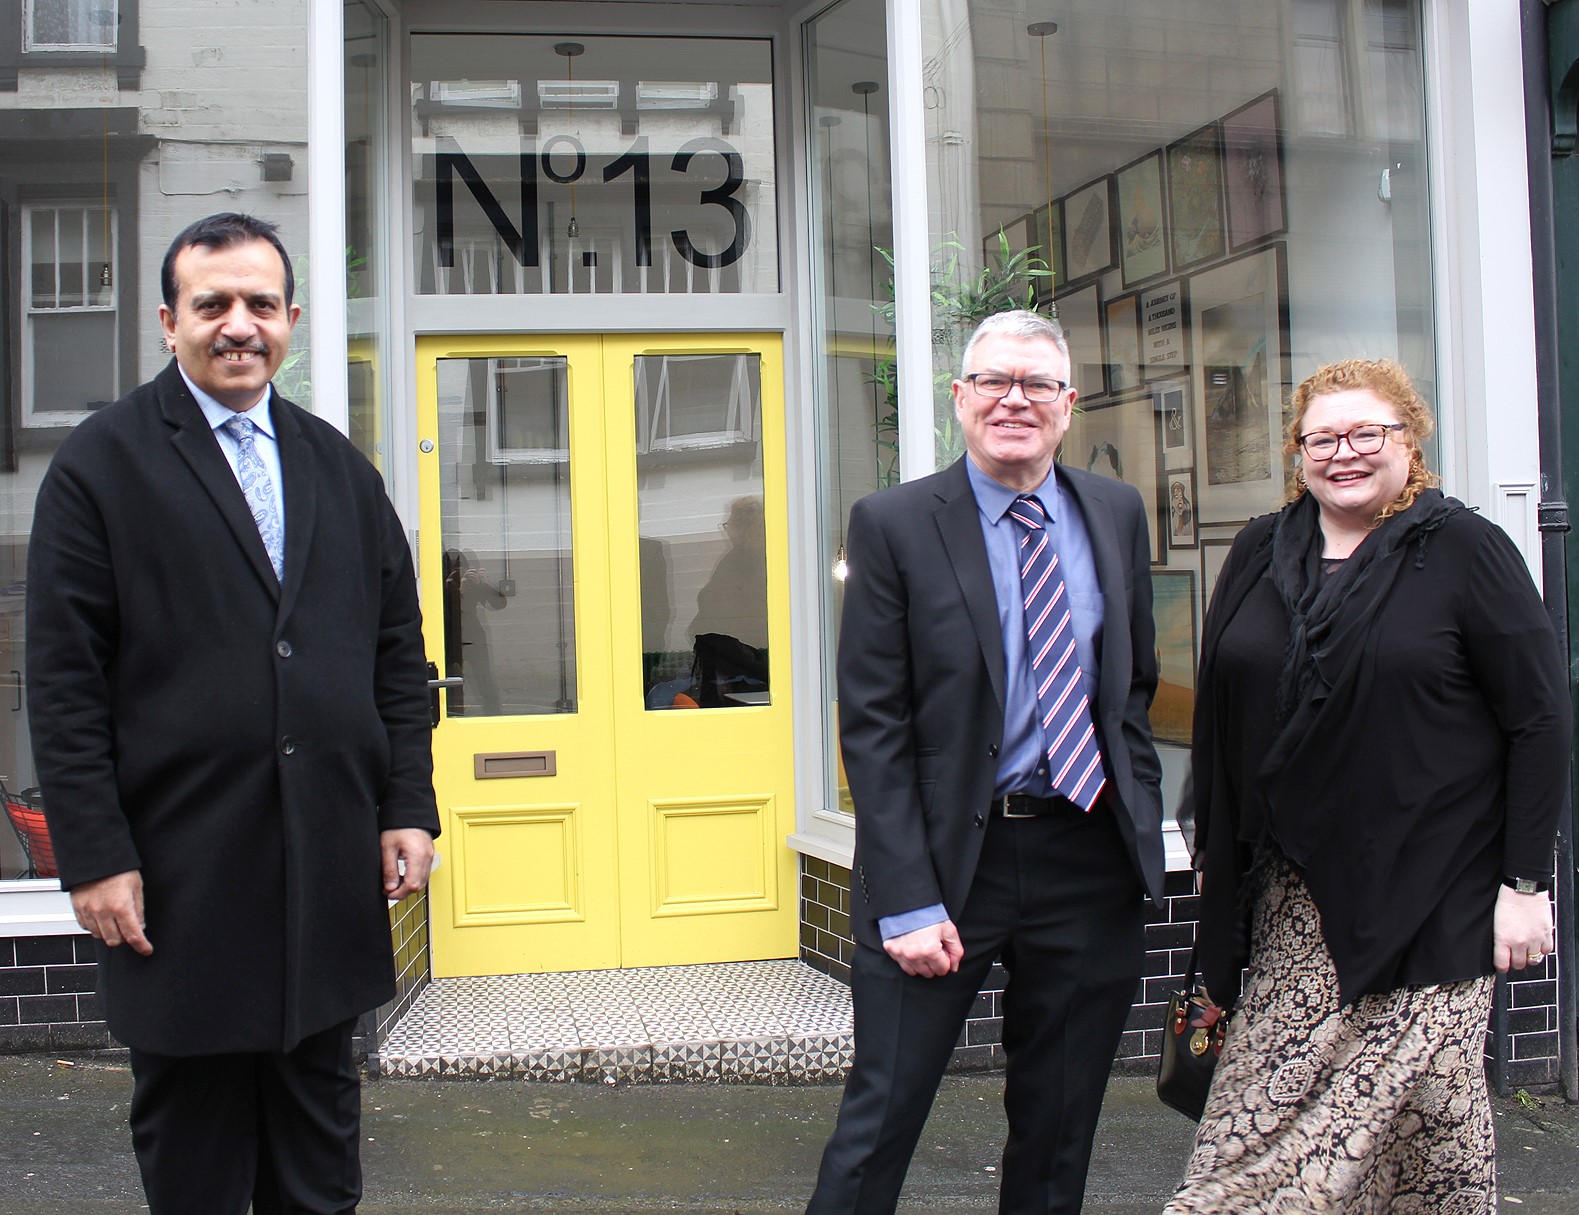 News story about grants still available to improve the look of businesses in Colne and Earby.